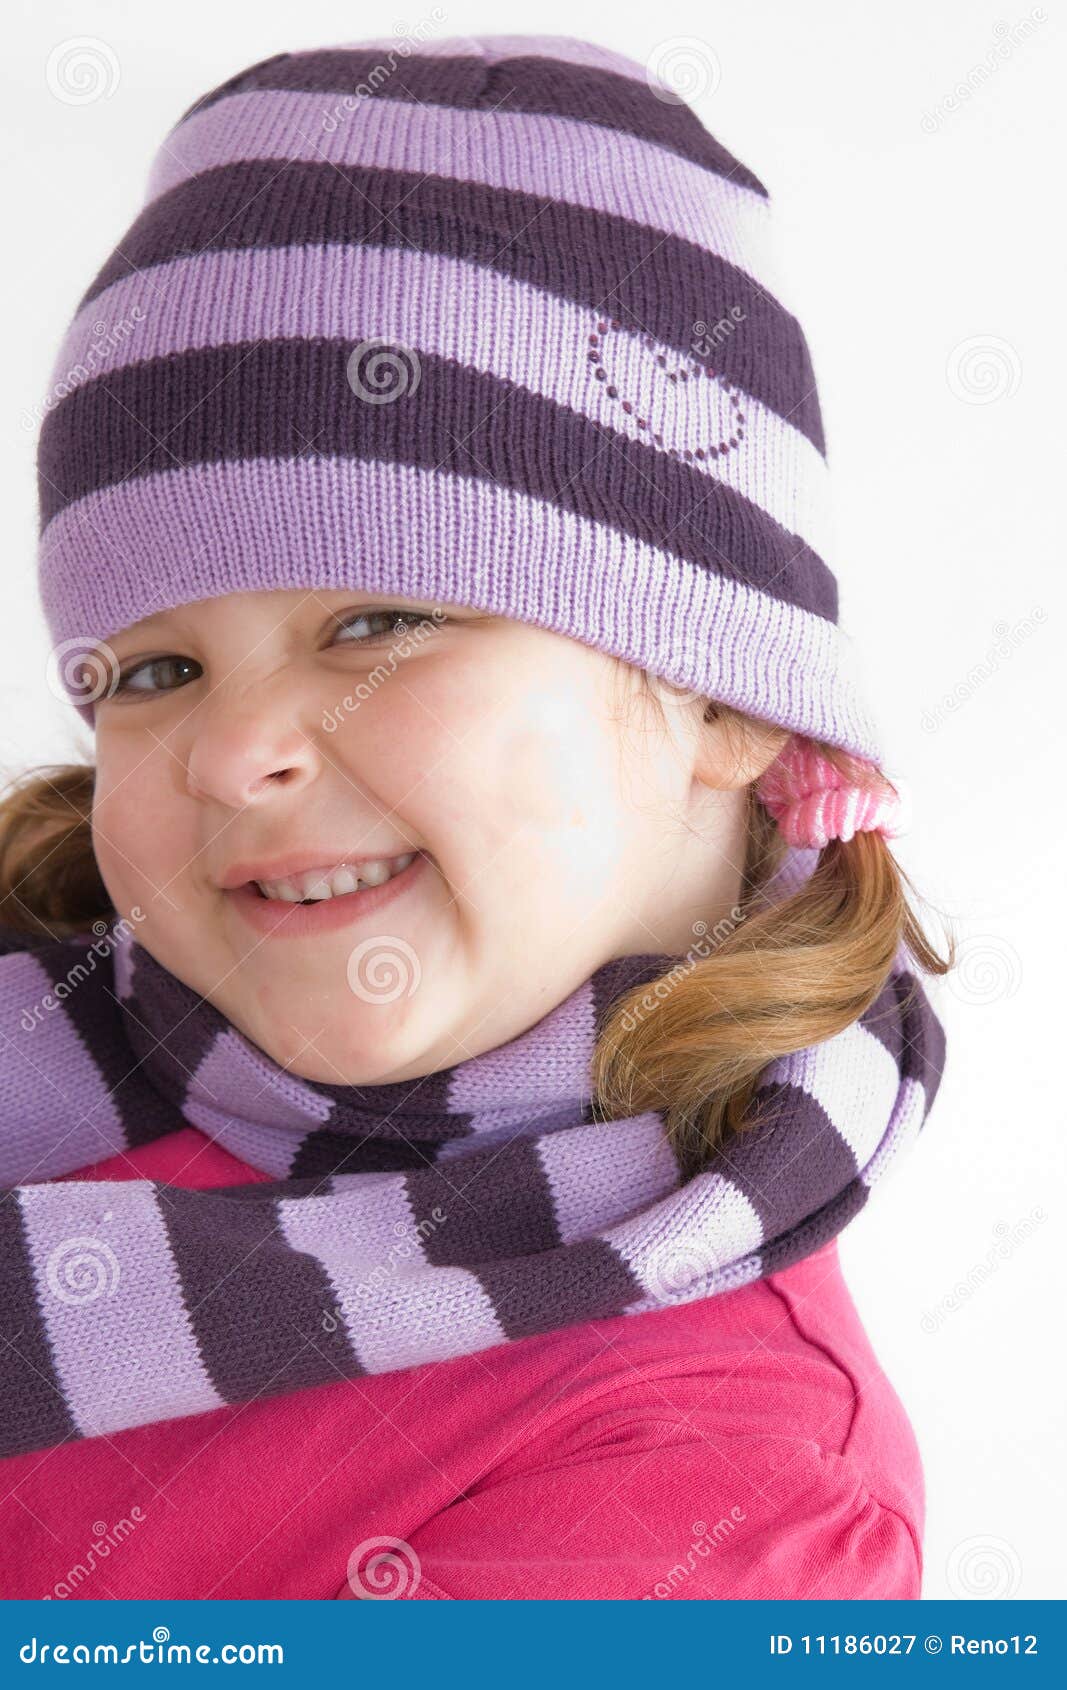 Get ready for winter stock image. Image of cold, clothes - 11186027